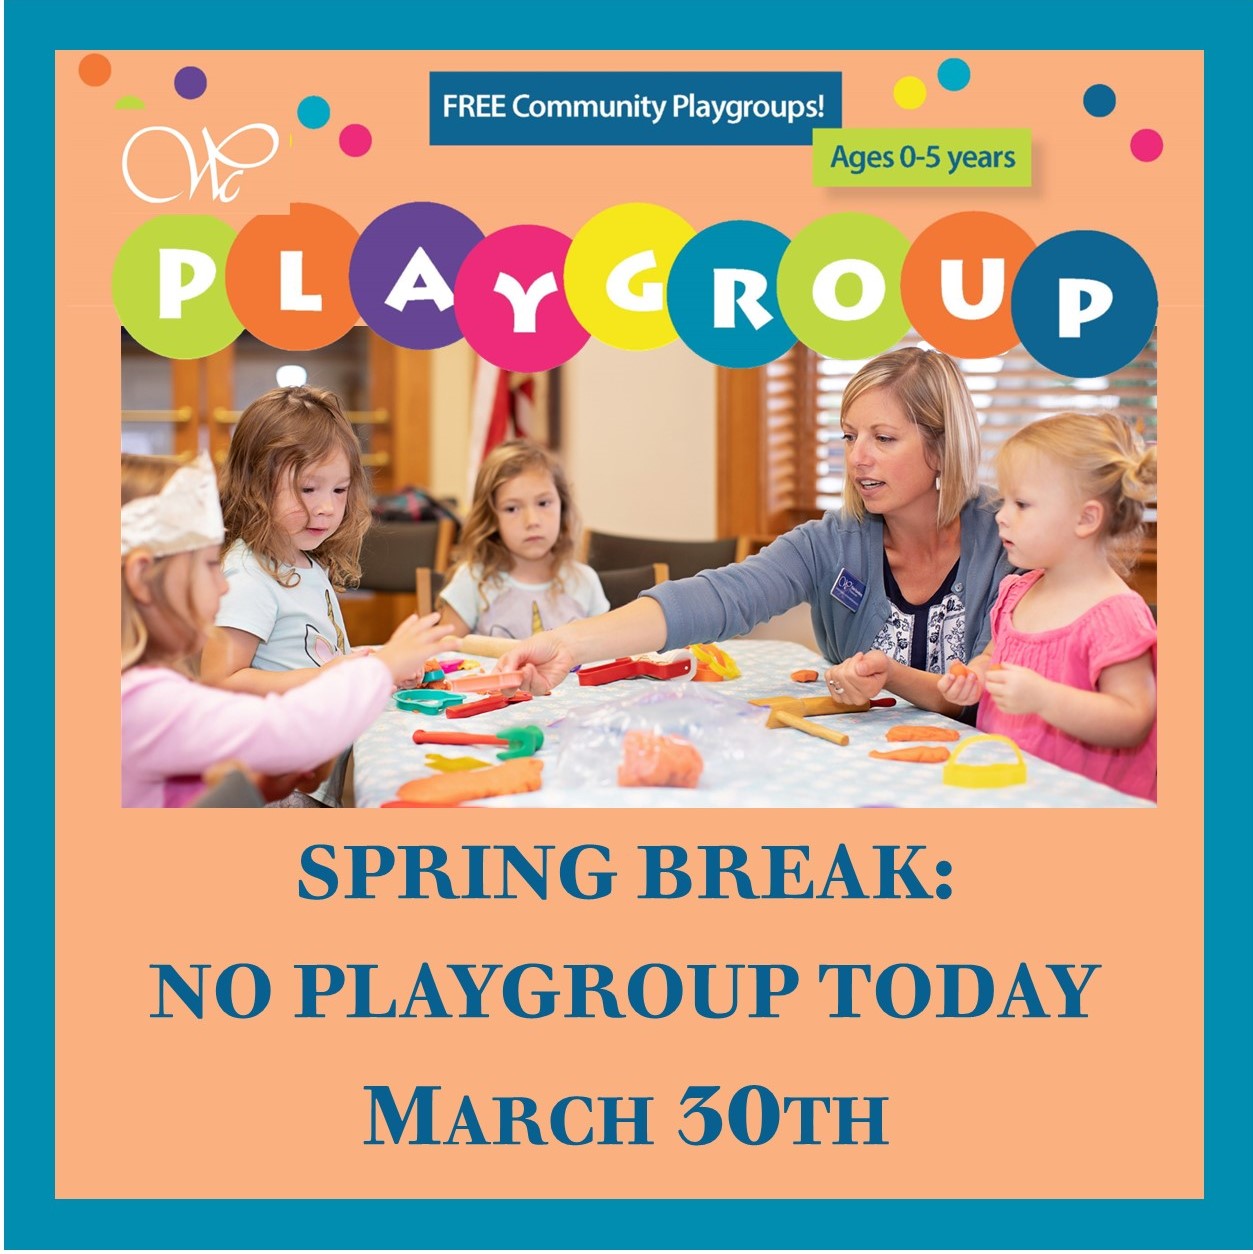 NO PLAYGROUP TODAY